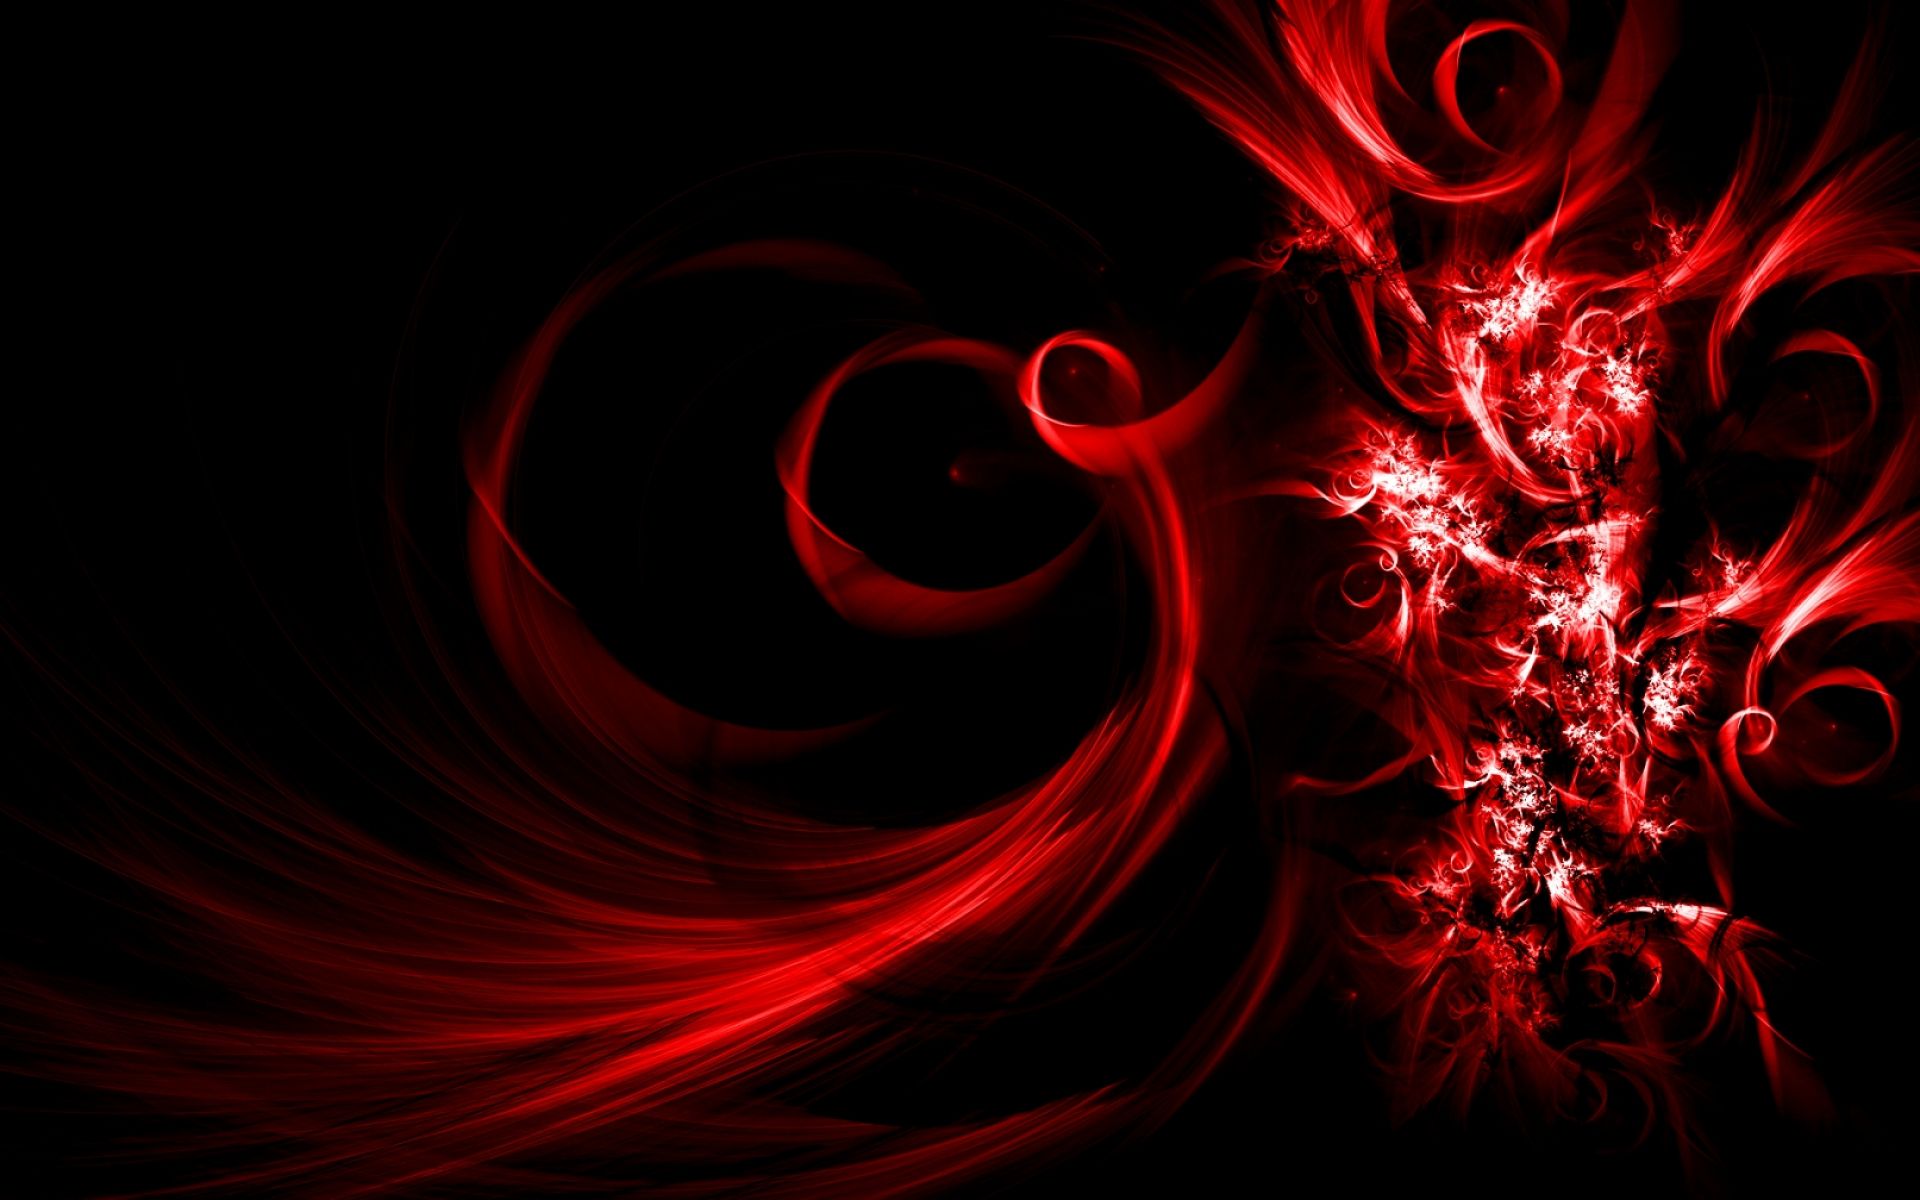 Awesome Red Splash Wallpaper. HD 3D and Abstract Wallpaper for Mobile and Desktop